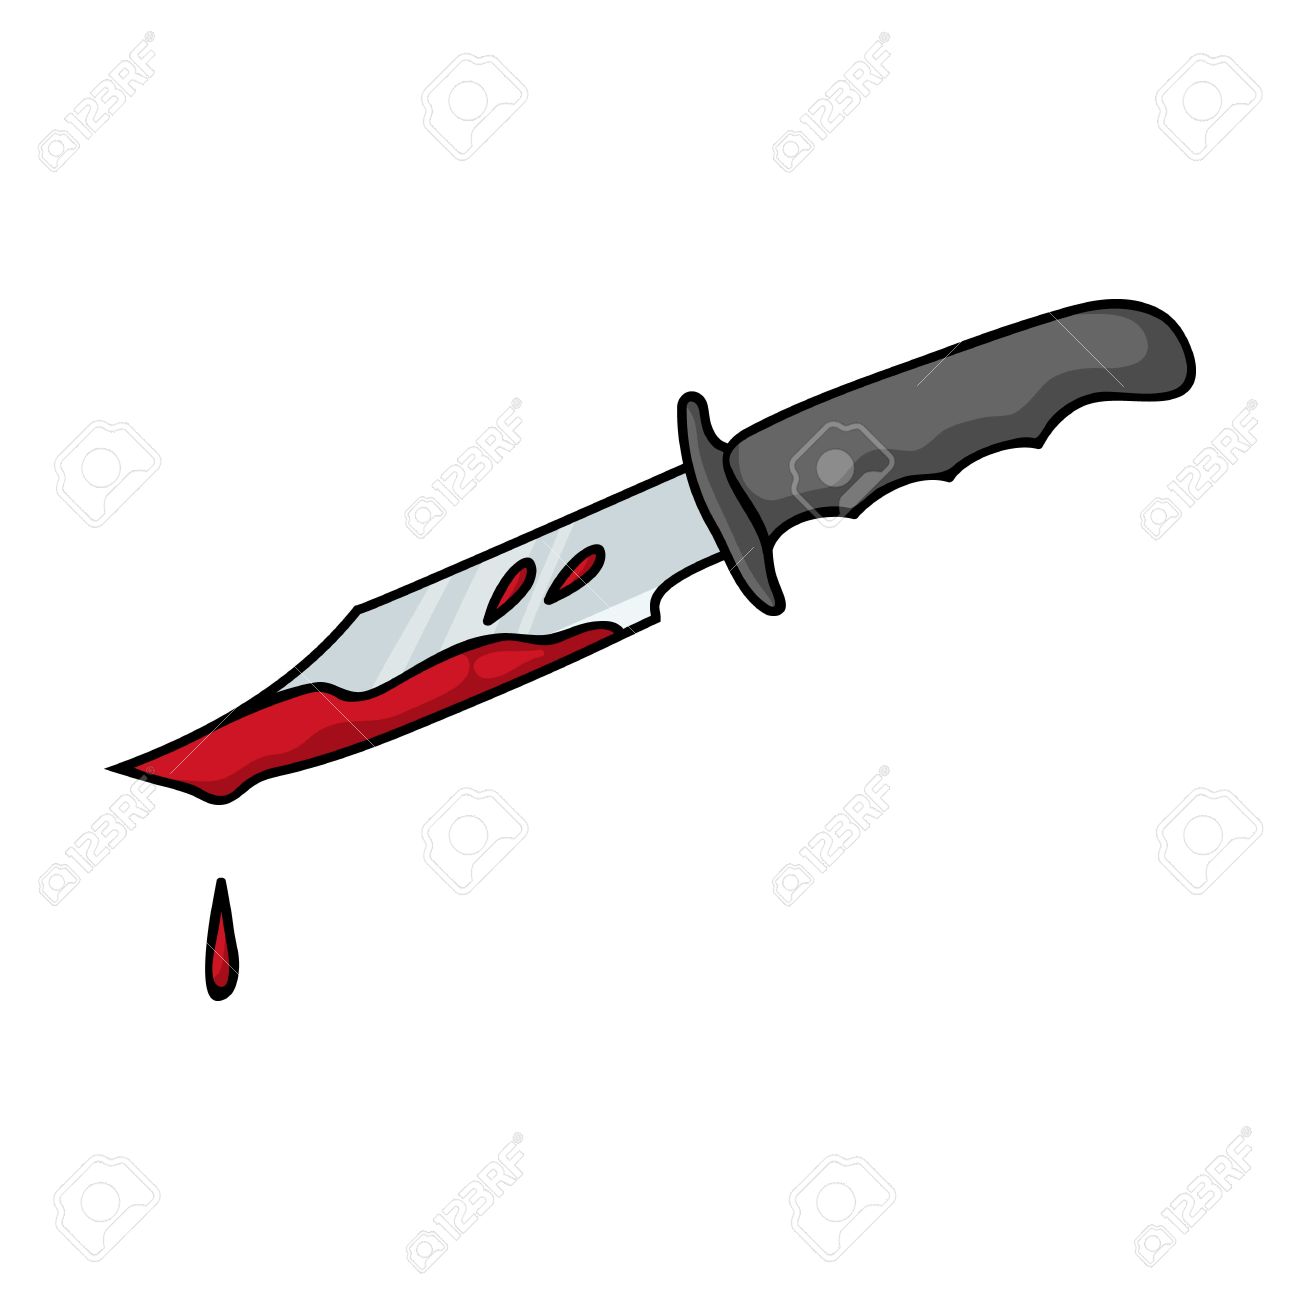 Bloody knife clipart.